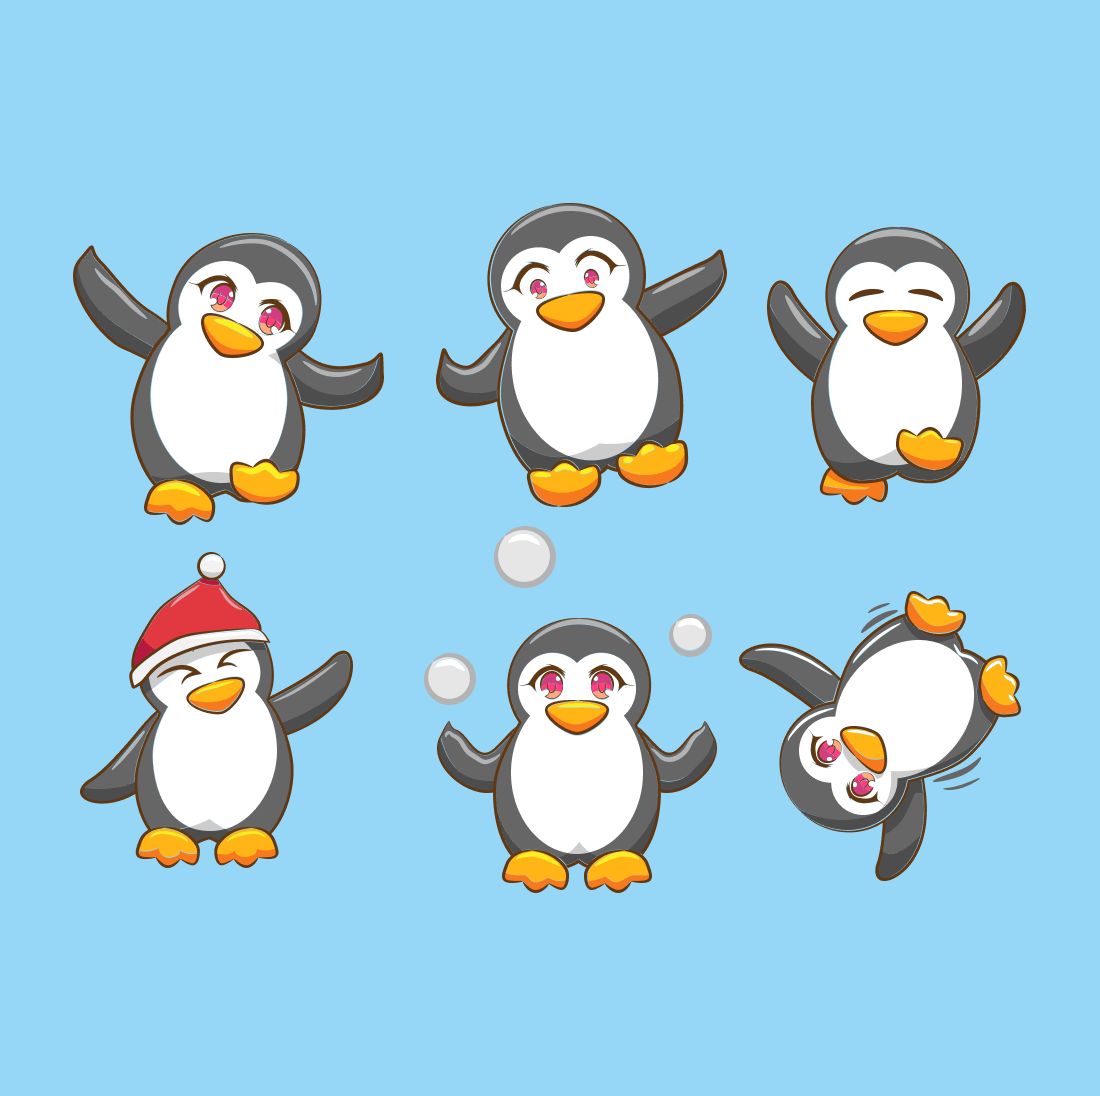 Set of penguins with different expressions on a blue background.